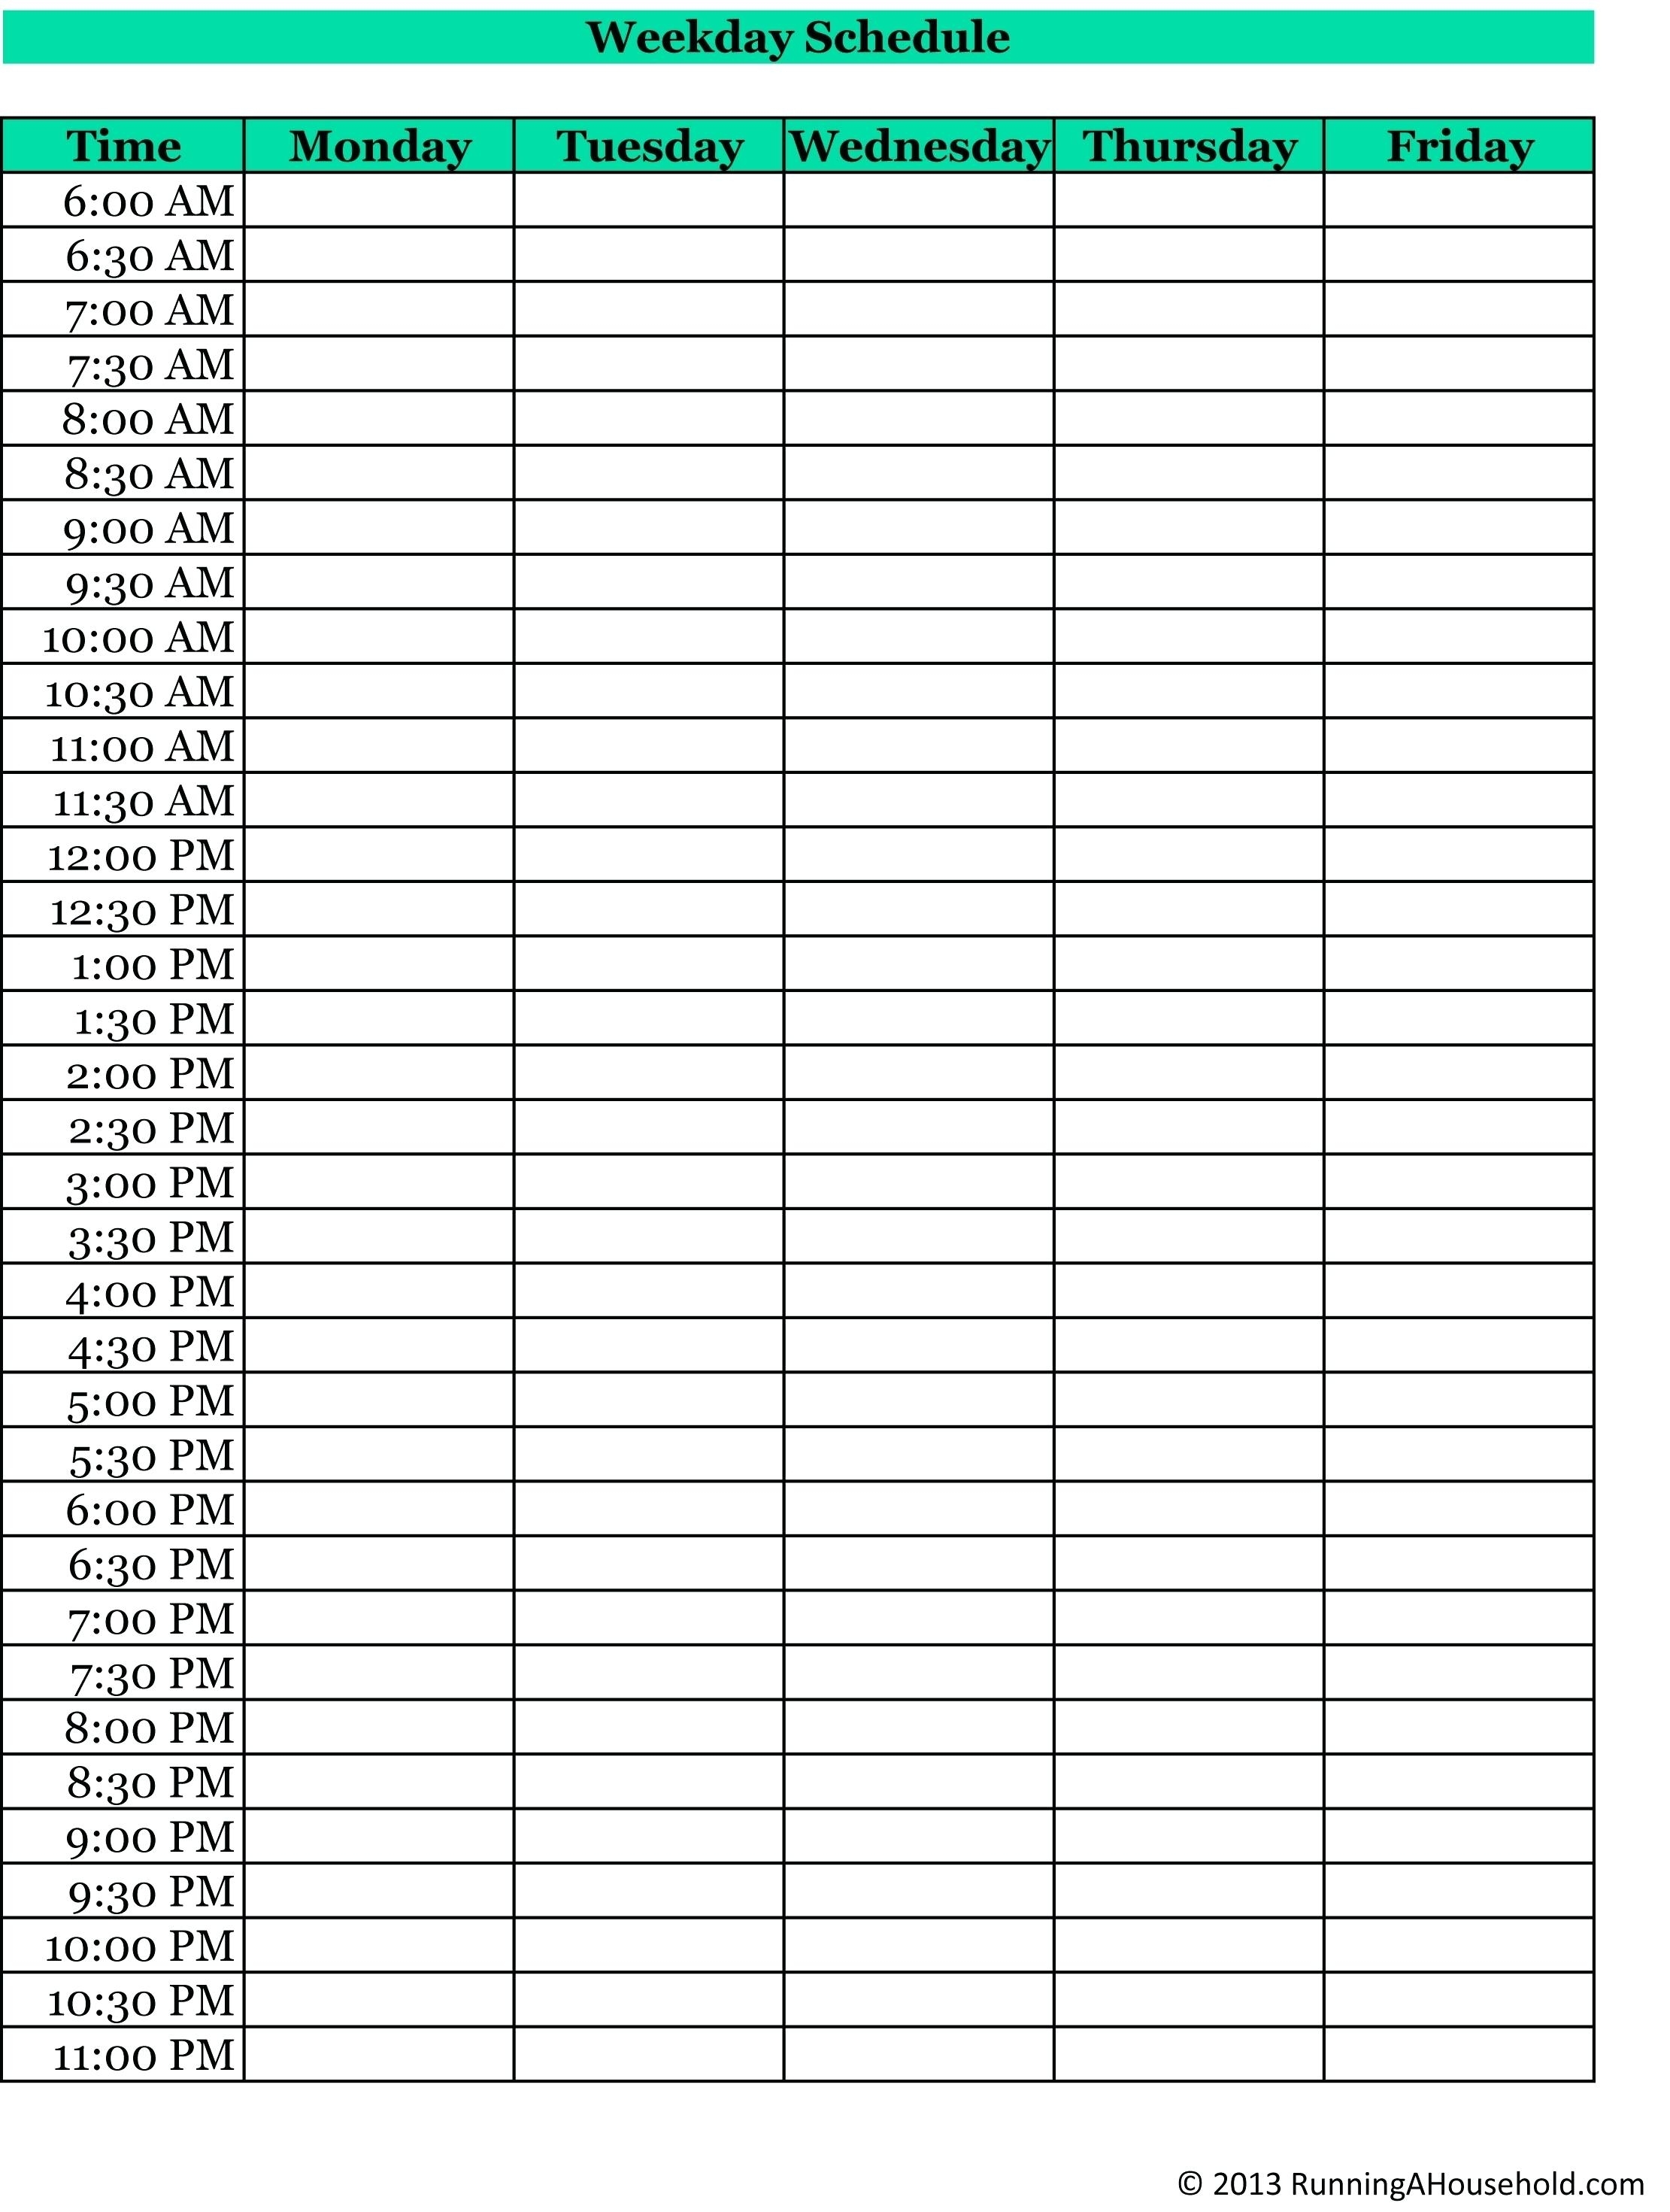 Blank Hourly Schedule Template Printable Hour Pdf Calendar Free throughout Free Calendar Templates For The Blind